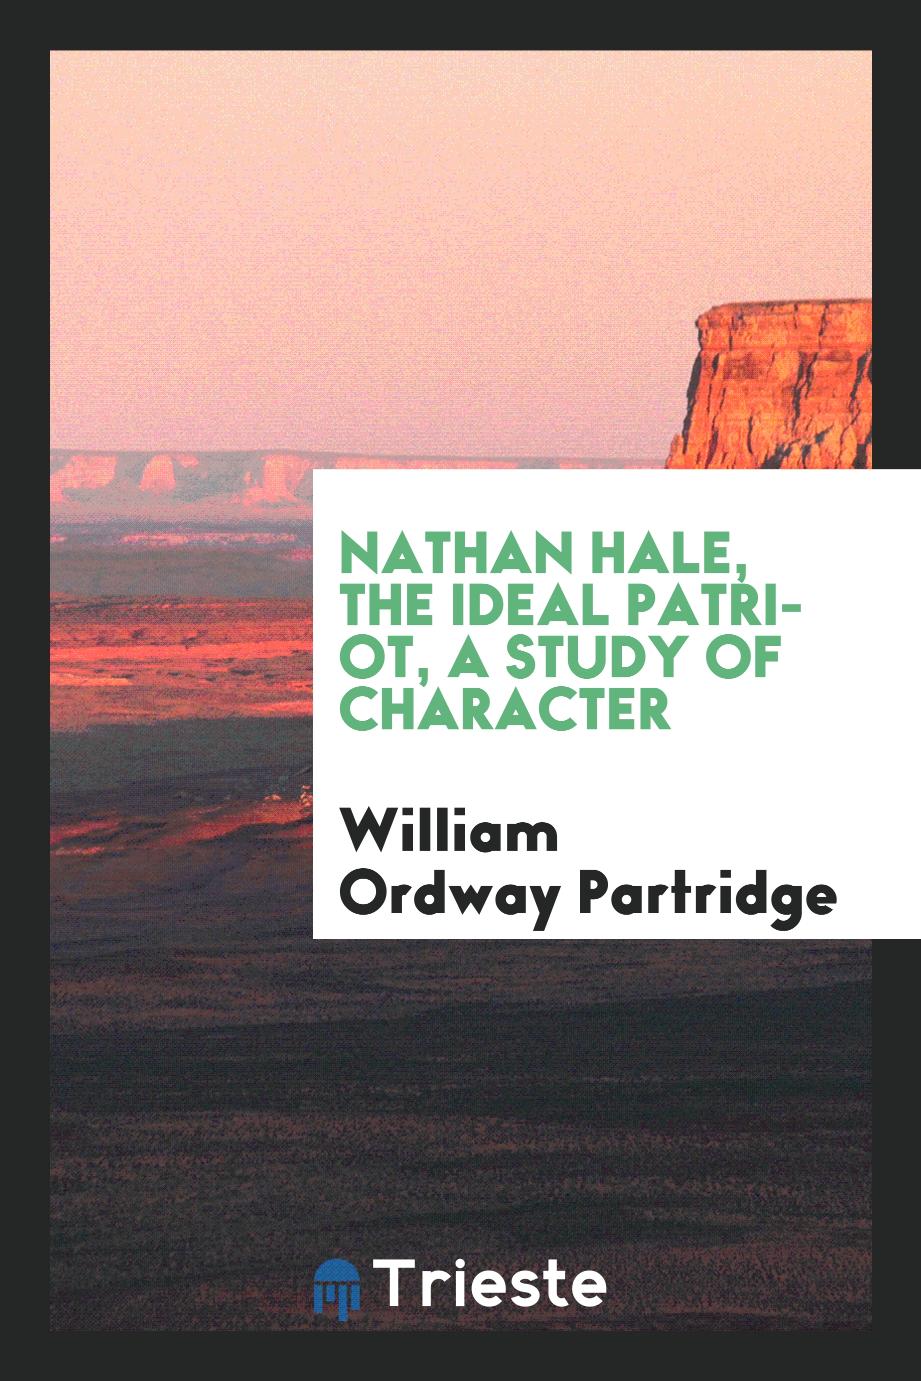 Nathan Hale, the Ideal Patriot, a Study of Character